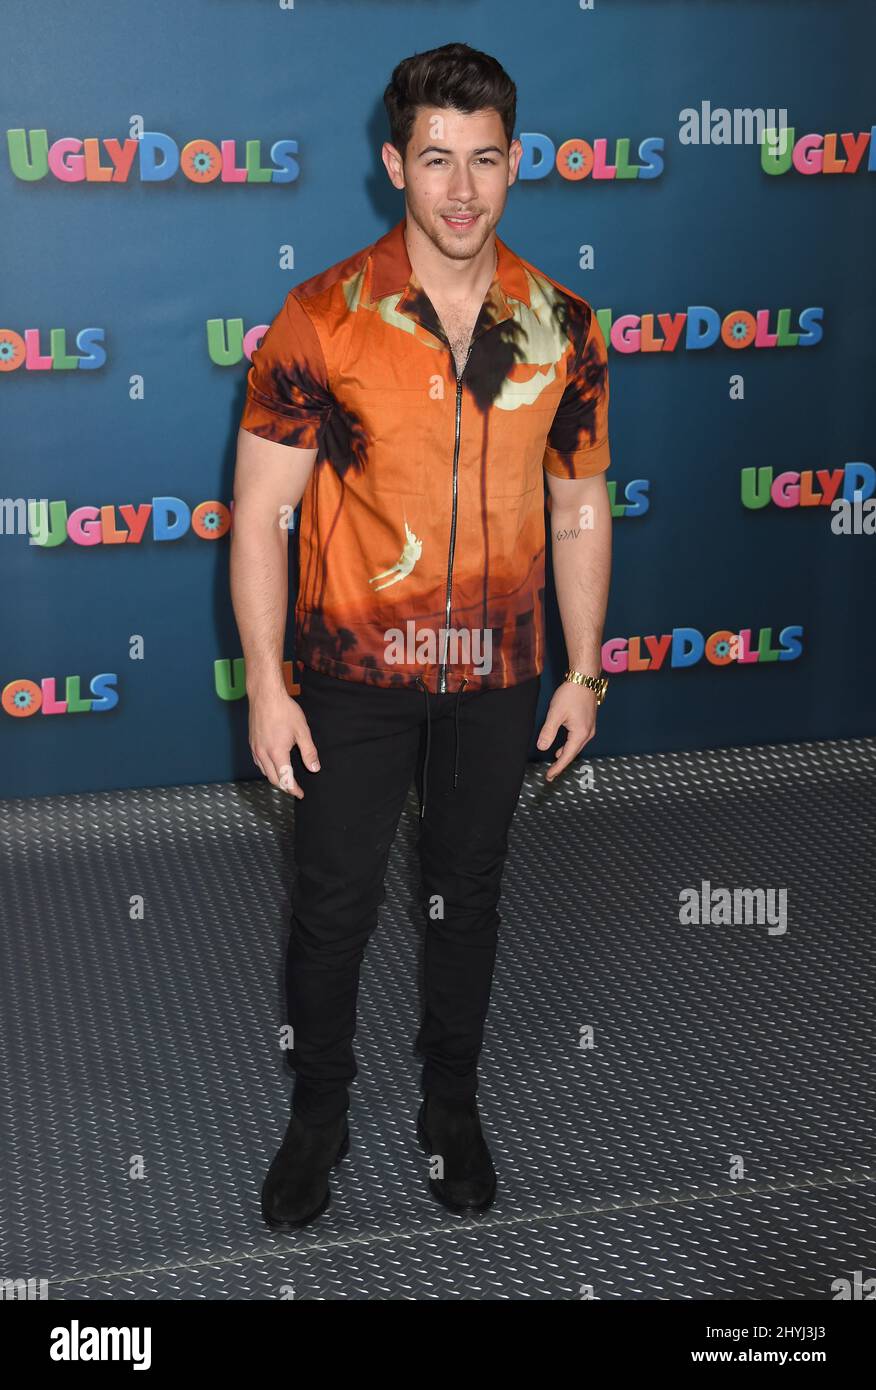 Nick Jonas attending the Ugly Dolls Photo Call in Los Angeles Stock Photo